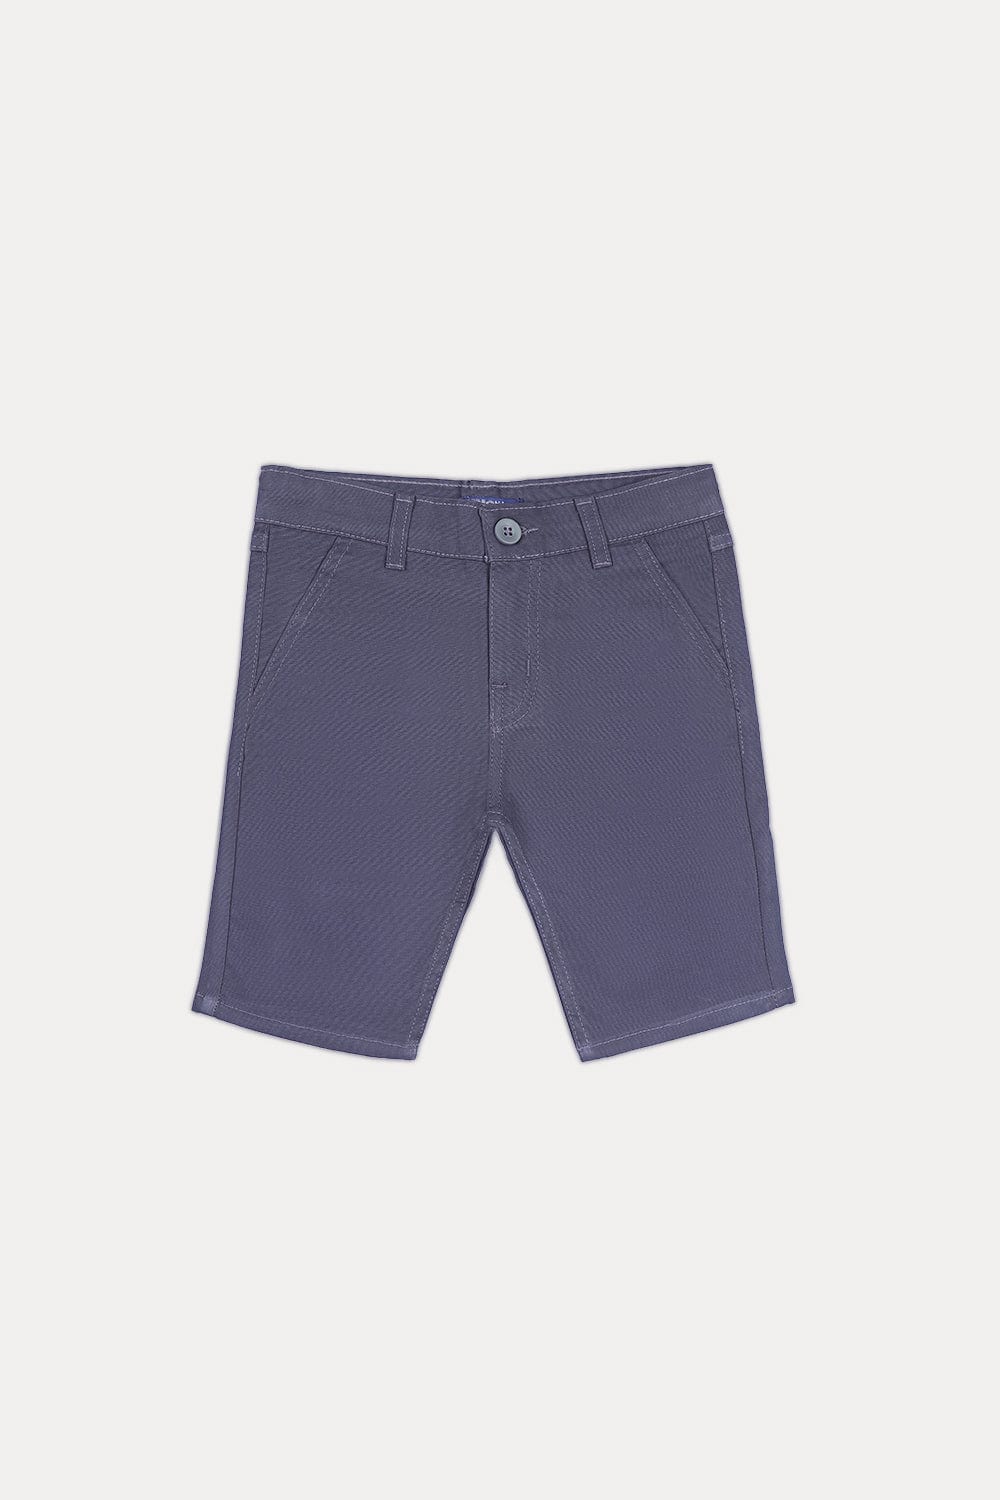 Boys Non Denim Shorts – HOPE NOT OUT